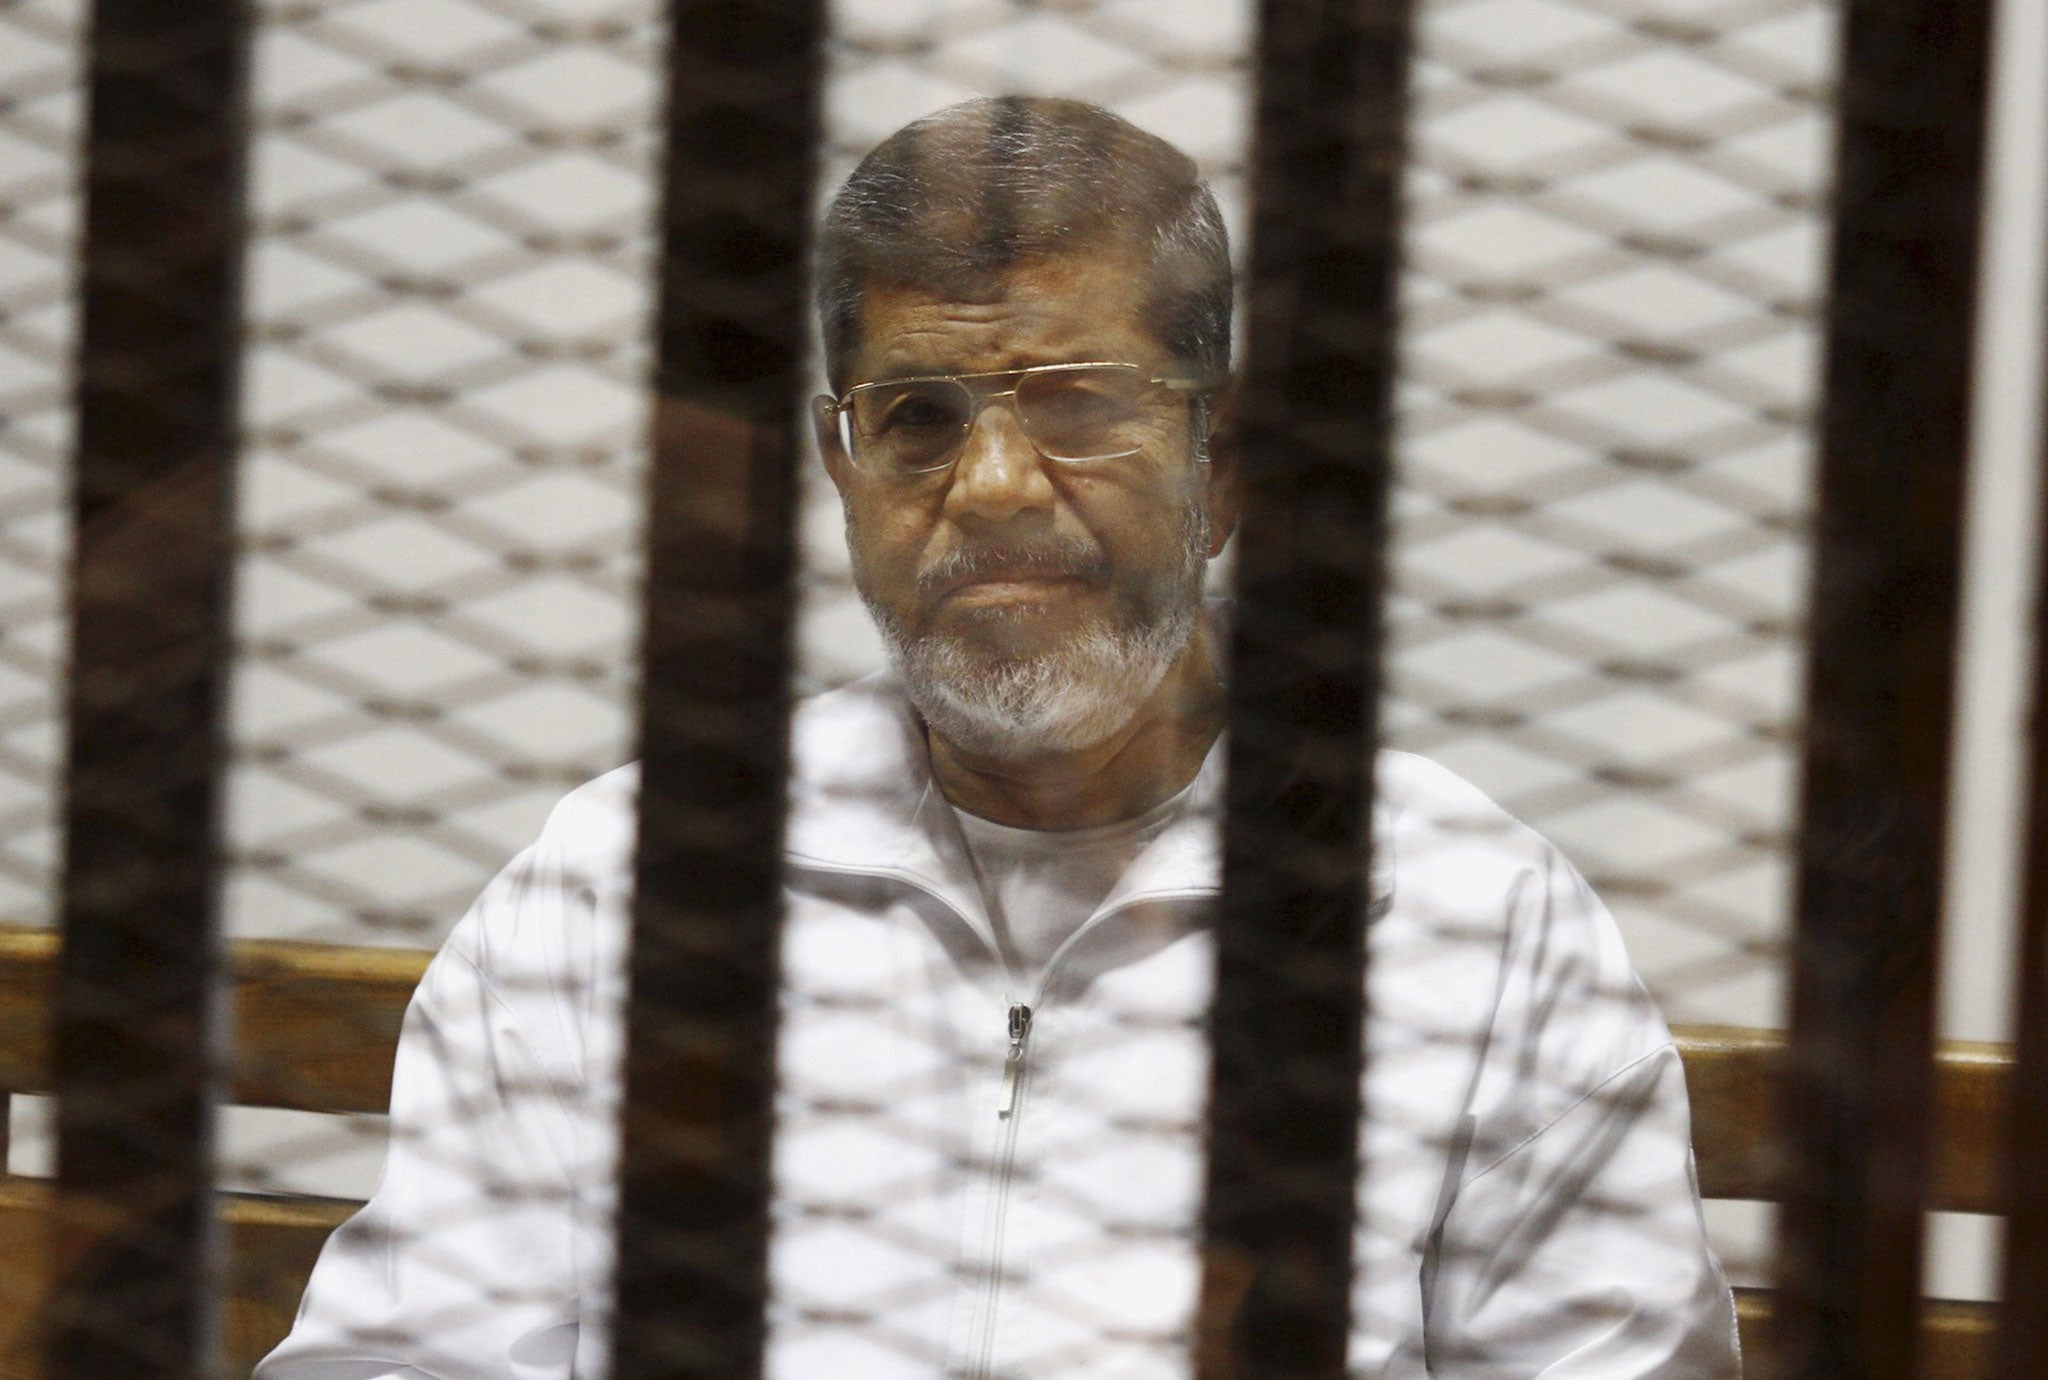 Mohamed Morsi has been sentenced to death after being found guilty of passing state secrets